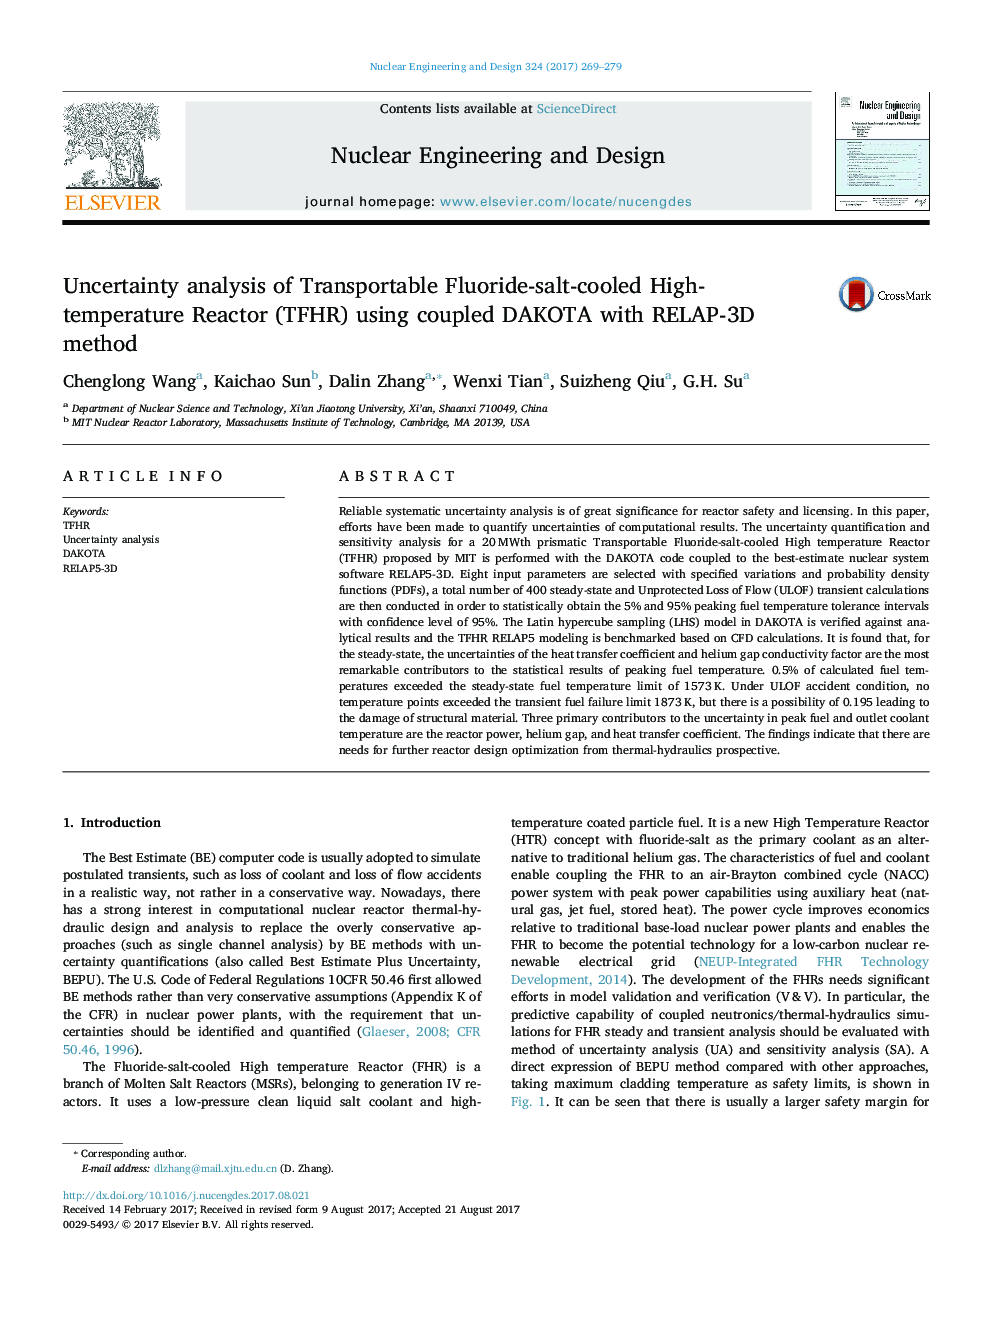 Uncertainty analysis of Transportable Fluoride-salt-cooled High-temperature Reactor (TFHR) using coupled DAKOTA with RELAP-3D method